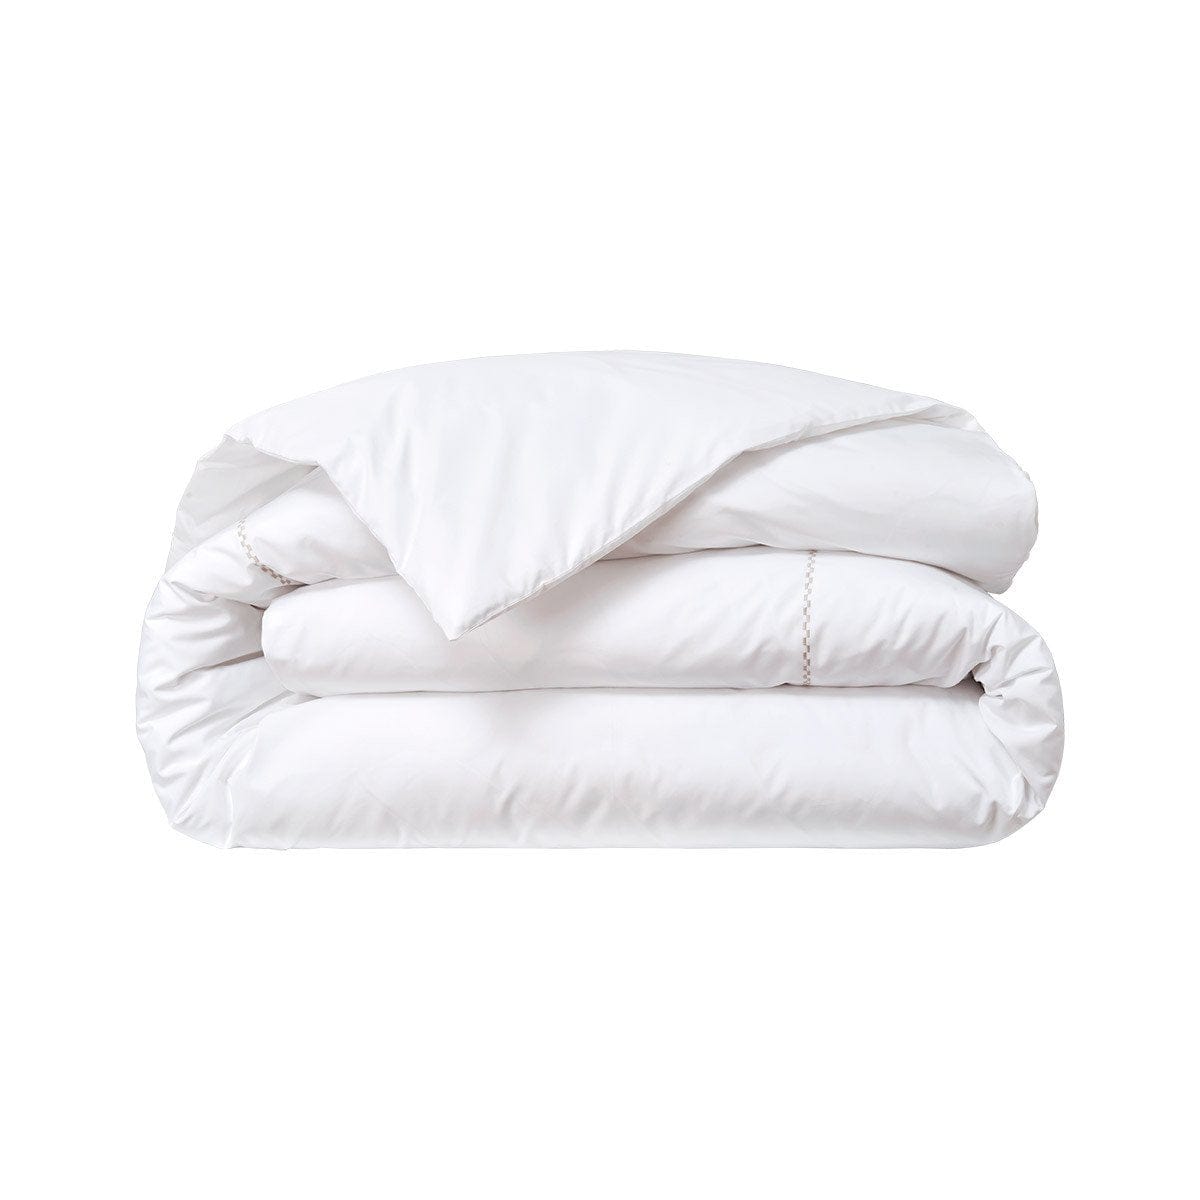 Duvet Cover Alienor Duvet Cover by Yves Delorme Twin 68 x 86 in / Galet Yves Delorme